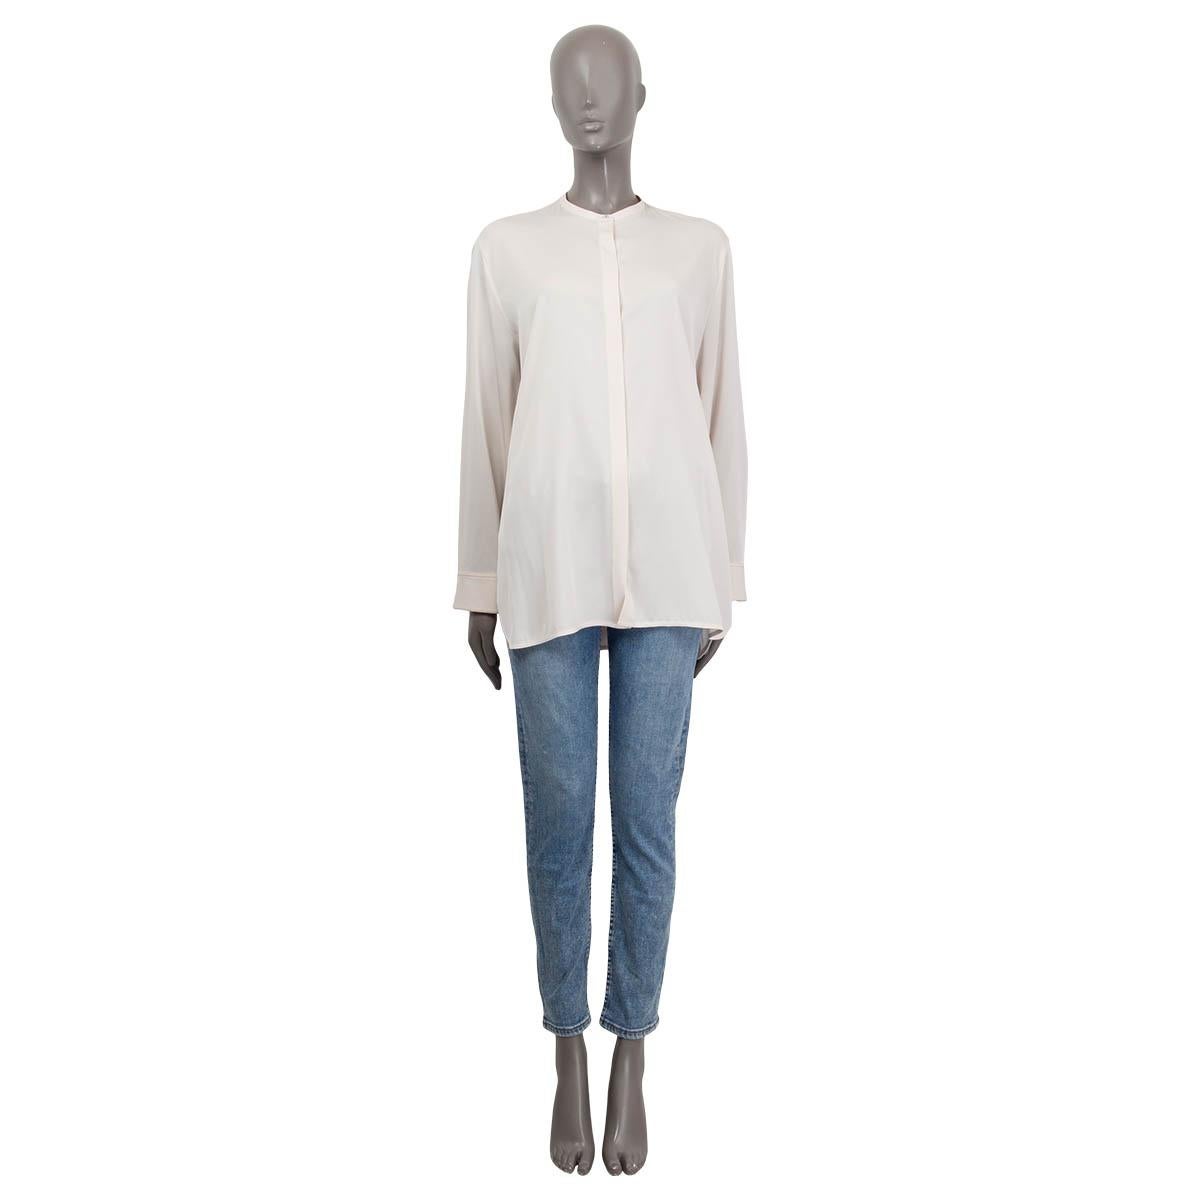 100% authentic The Row long sleeve oversized shirt in ivory silk (93%) and elastane (7%). Features buttoned cuffs and a eggplant hem sticht at the cuffs. Opens with eight shell buttons. Brand new, with tags. 

Measurements
Tag Size	M
Size	M
Shoulder